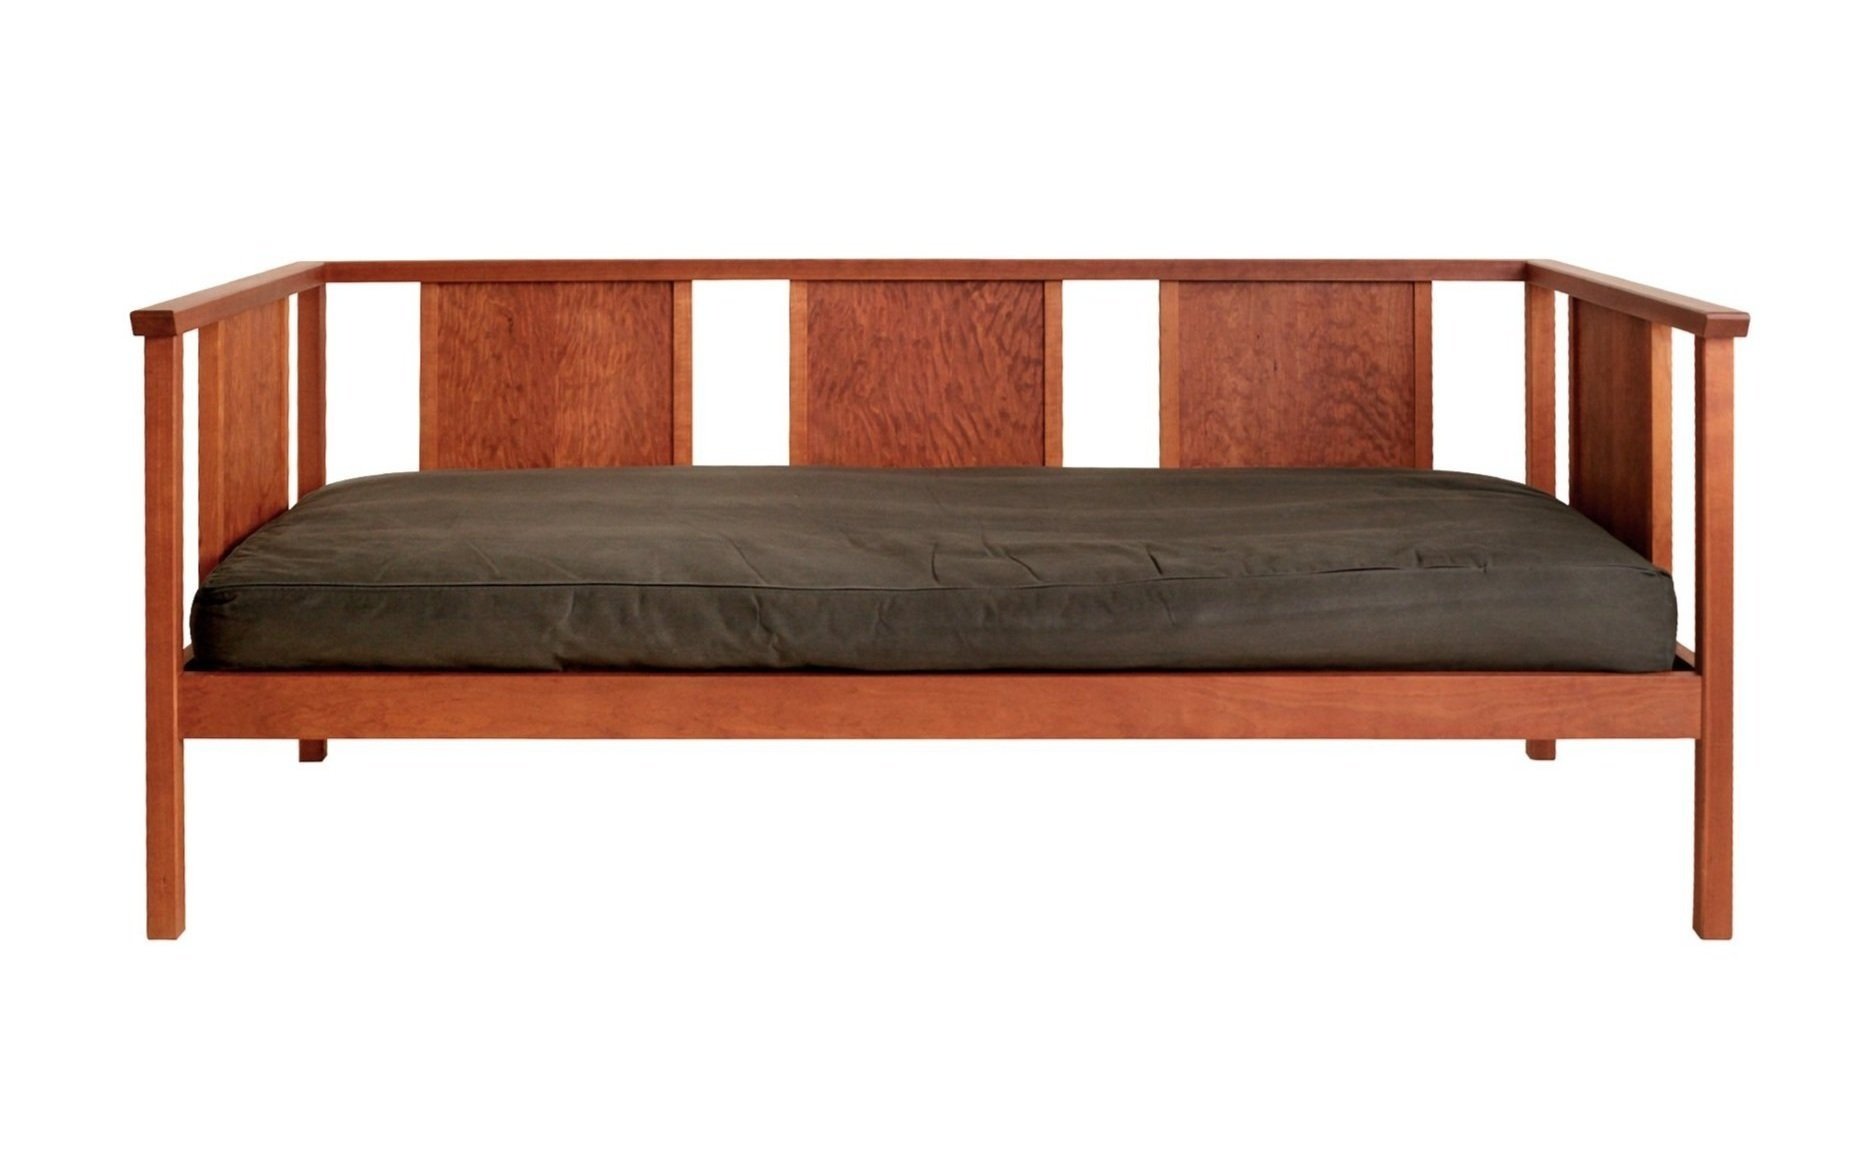 The Lyon Daybed